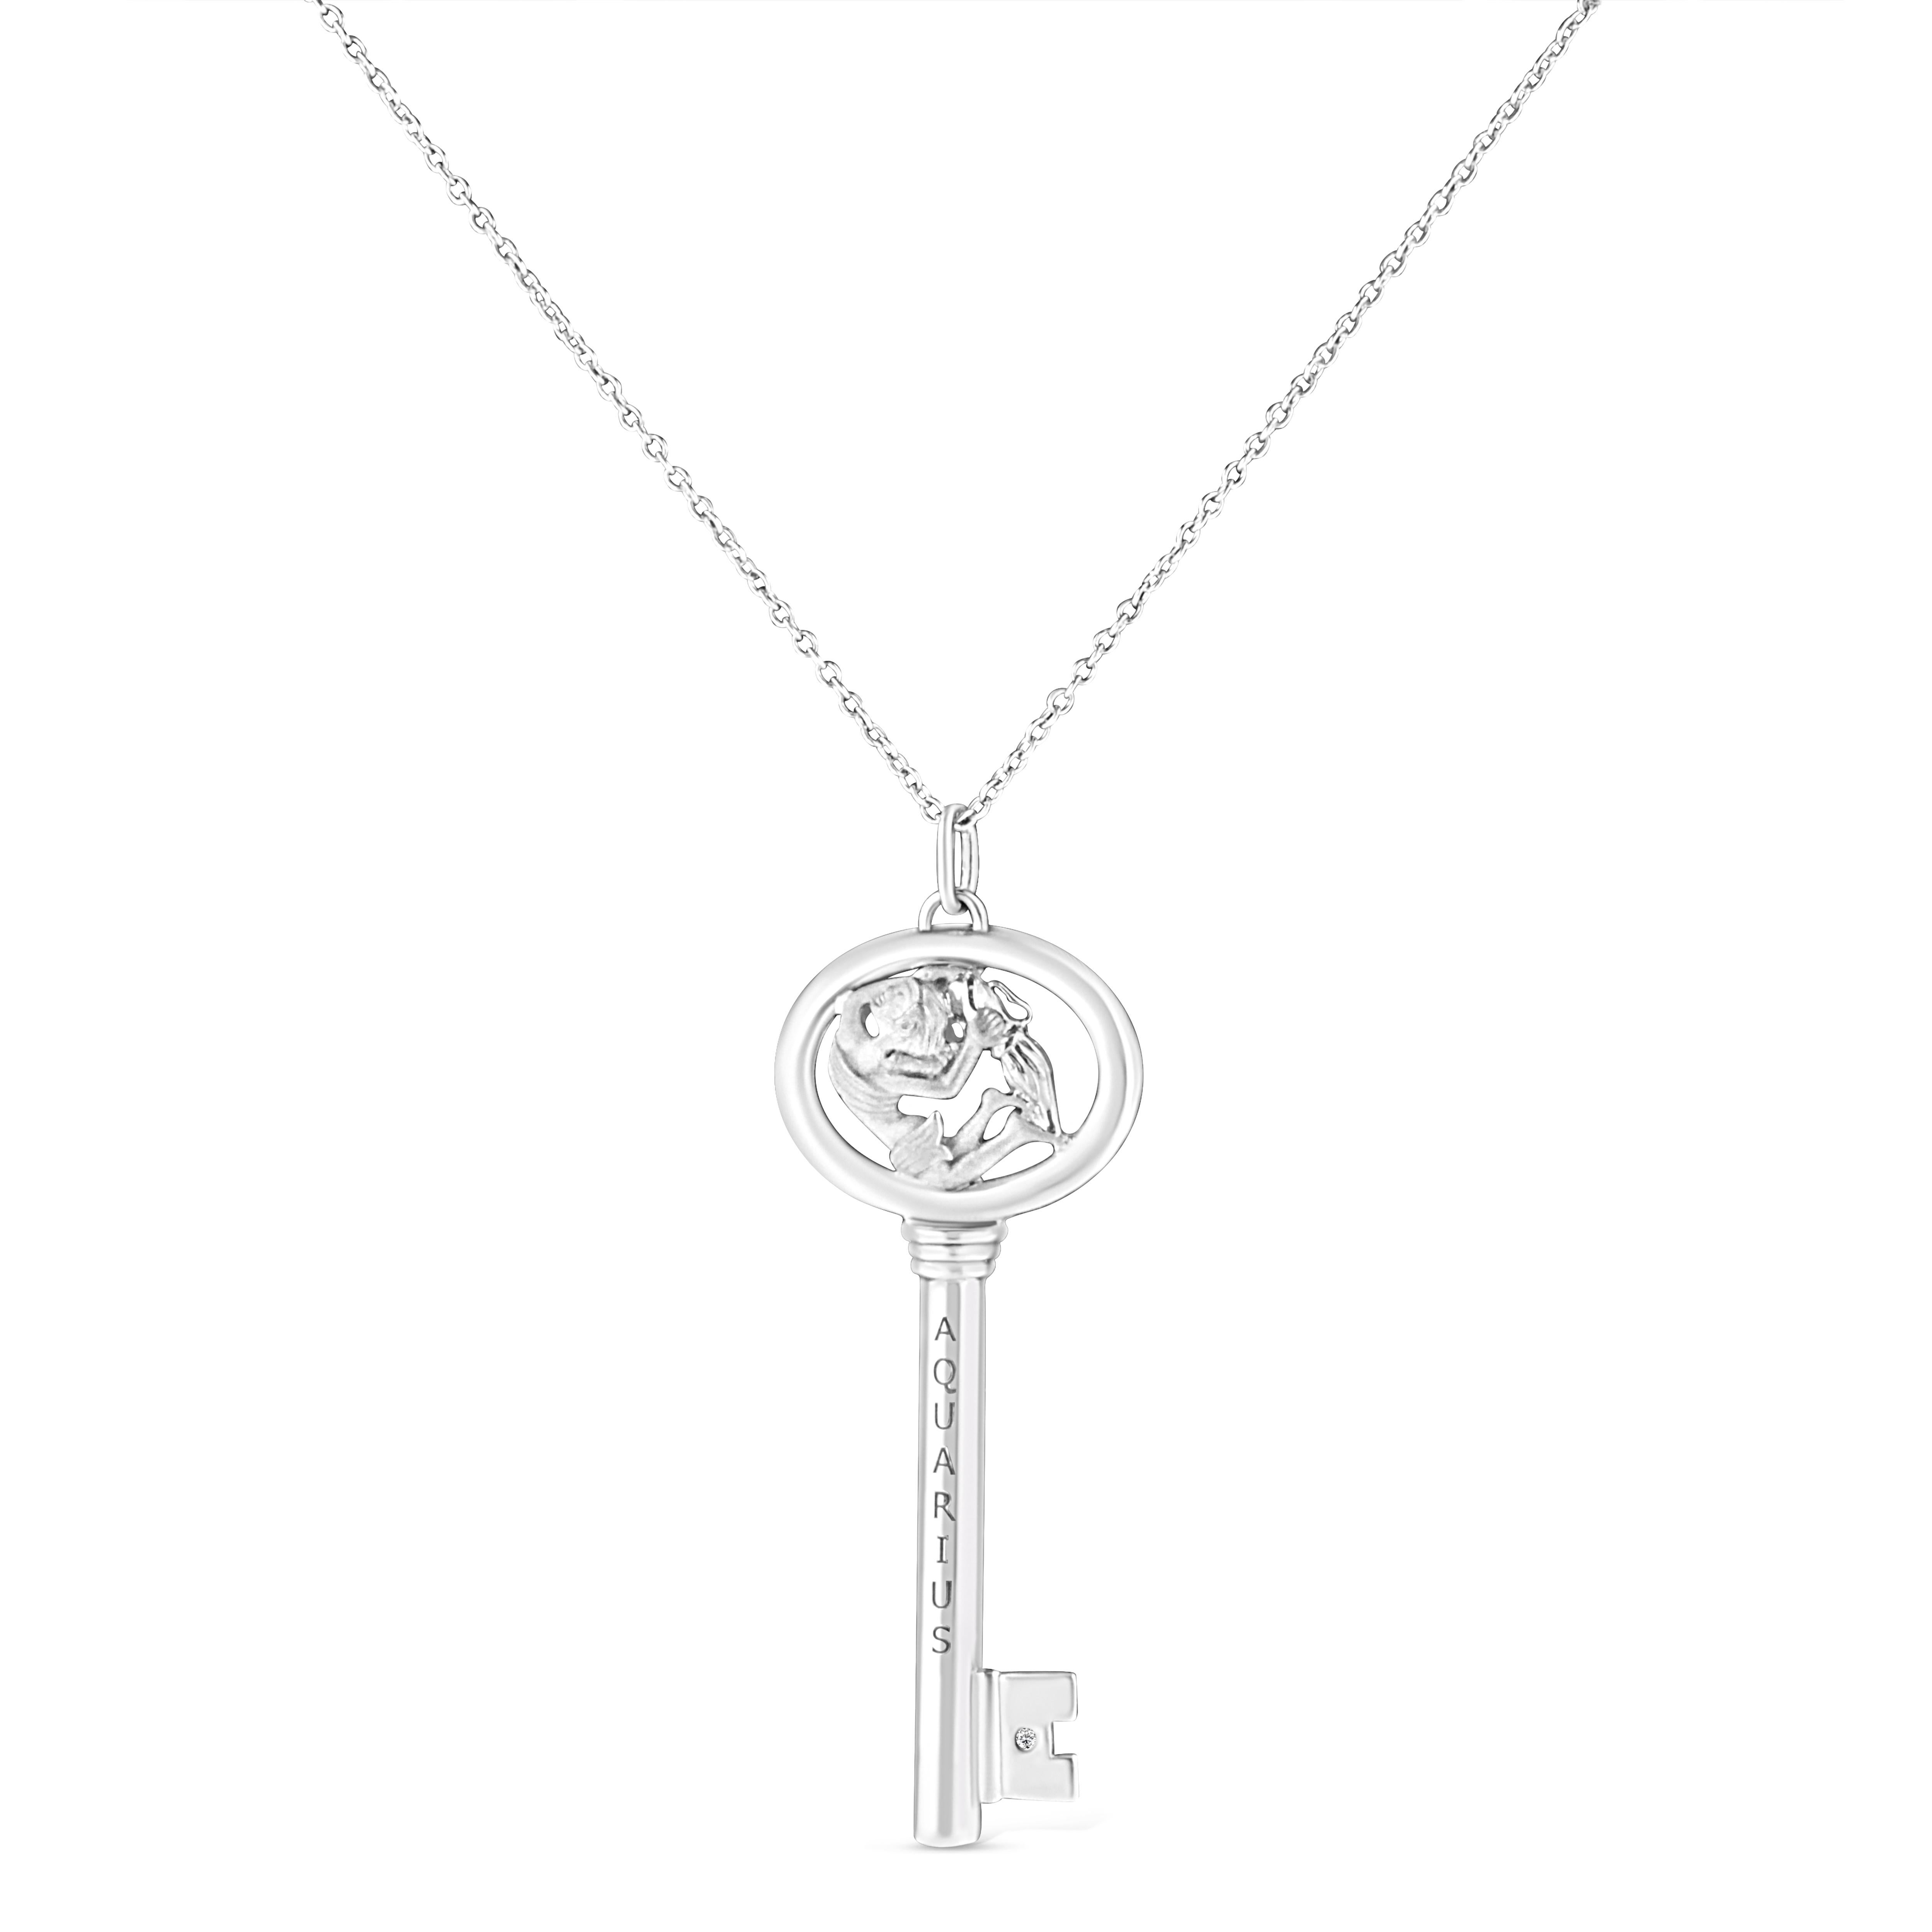 It's as if the stars aligned to create this stunning .925 Sterling Silver necklace flaunting an Aquarius zodiac pendant accented by a glimmering bezel set natural diamond. Brilliant beacons of optimism and hope, our Zodiac Keys are radiant symbols